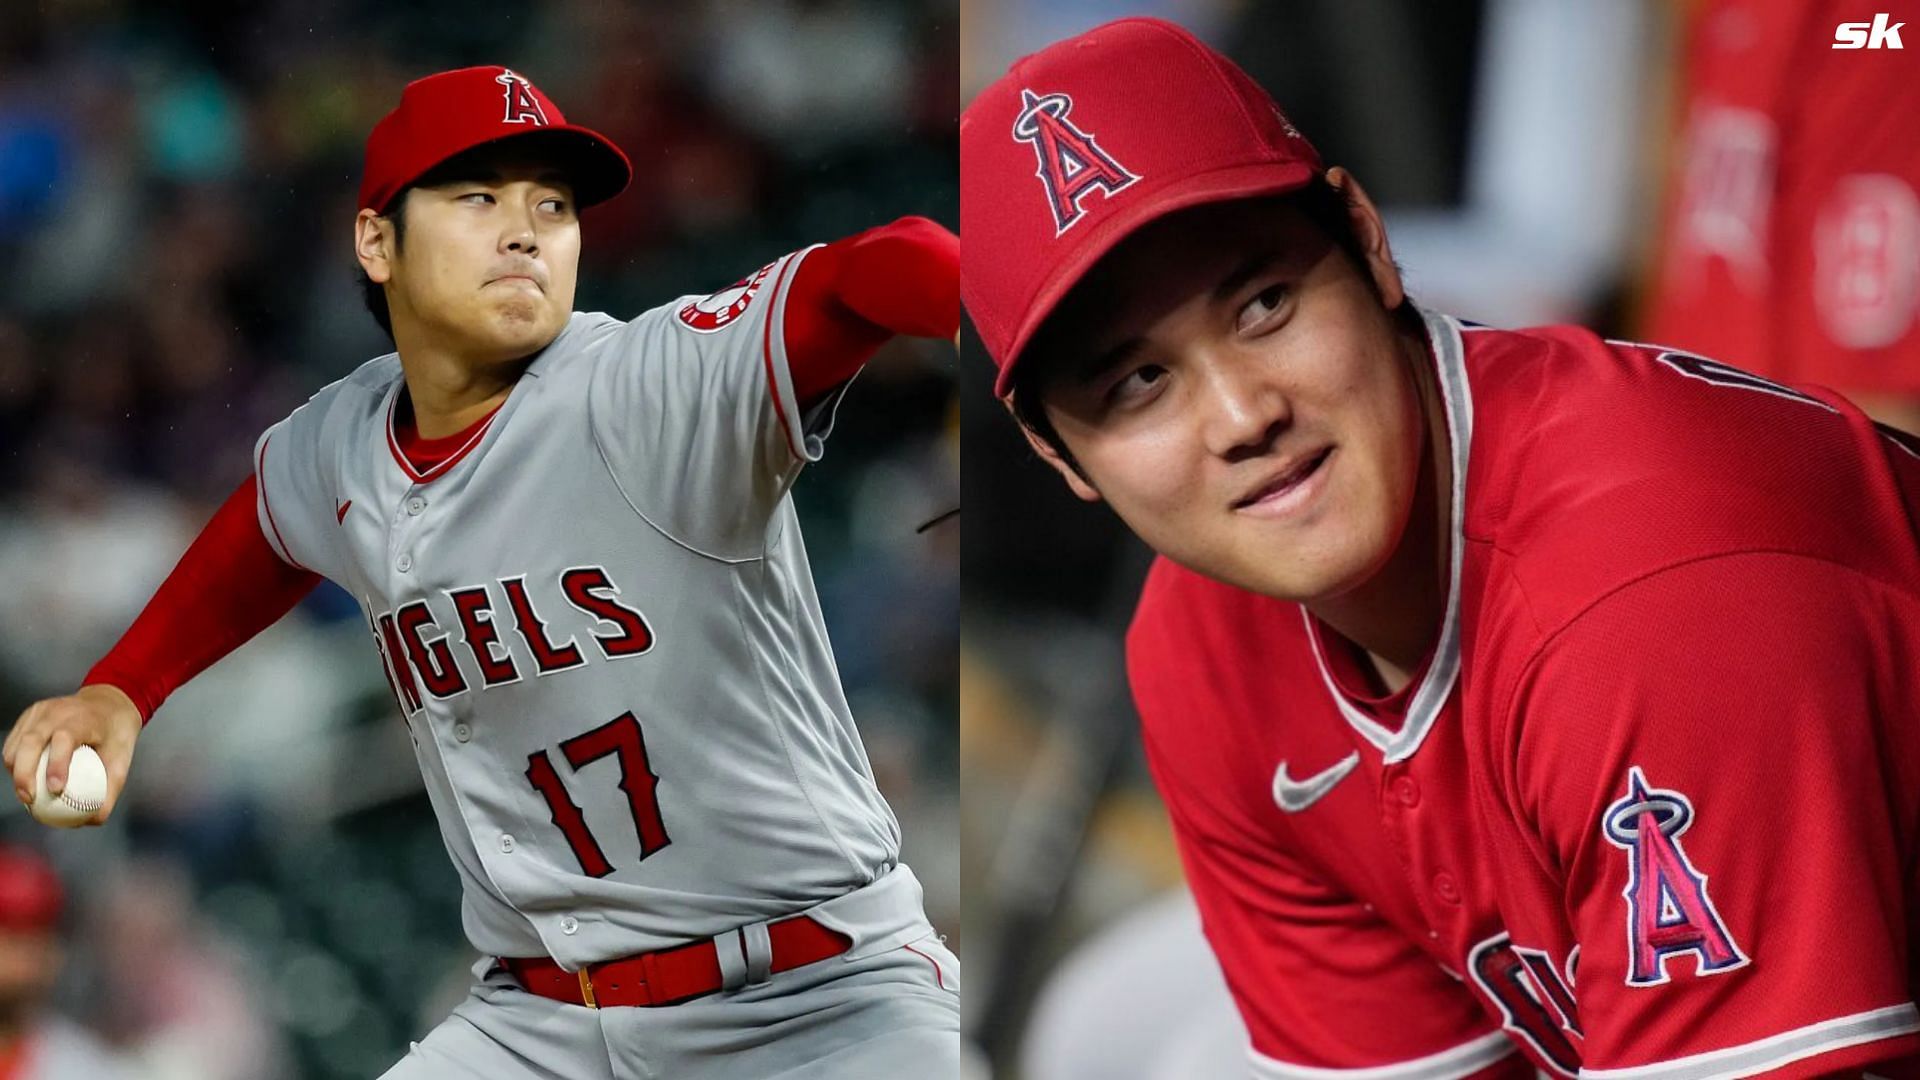 The contractual wars to sign Shohei Ohtani continues this offseason